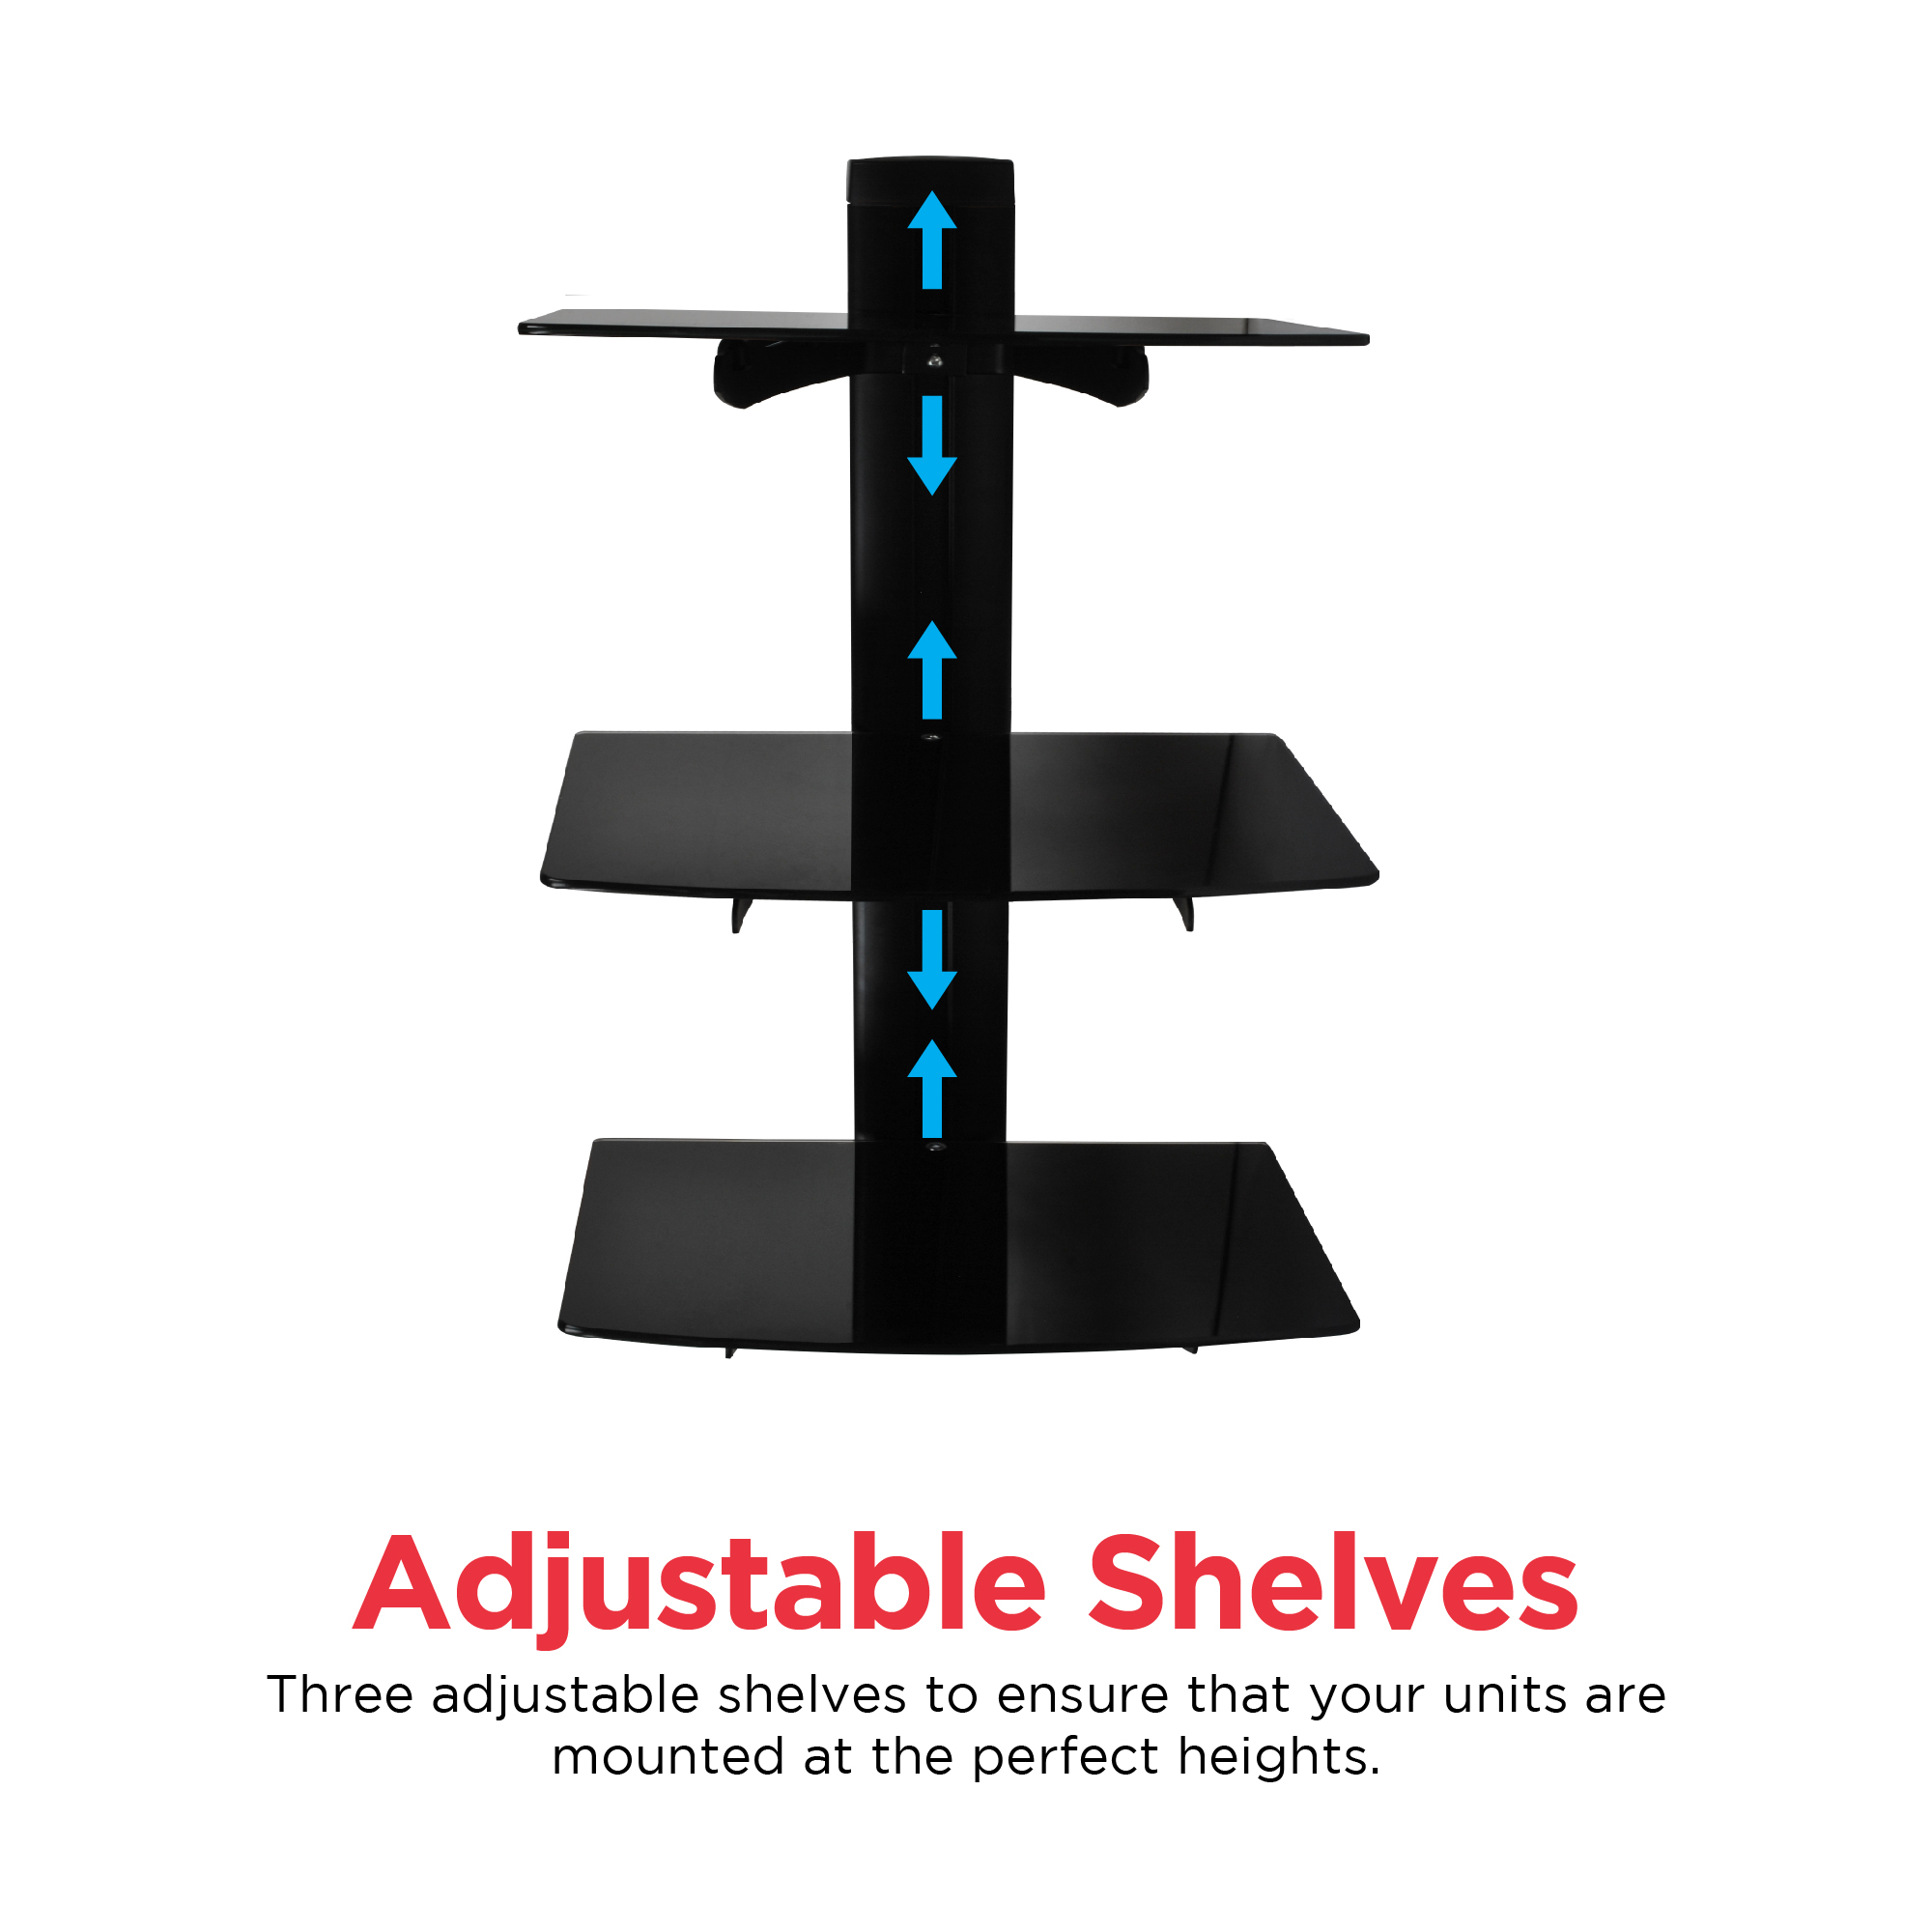 Ematic Adjustable Universal DVD Player Wall Mount 15" 3-Tier Floating Shelf - image 5 of 8